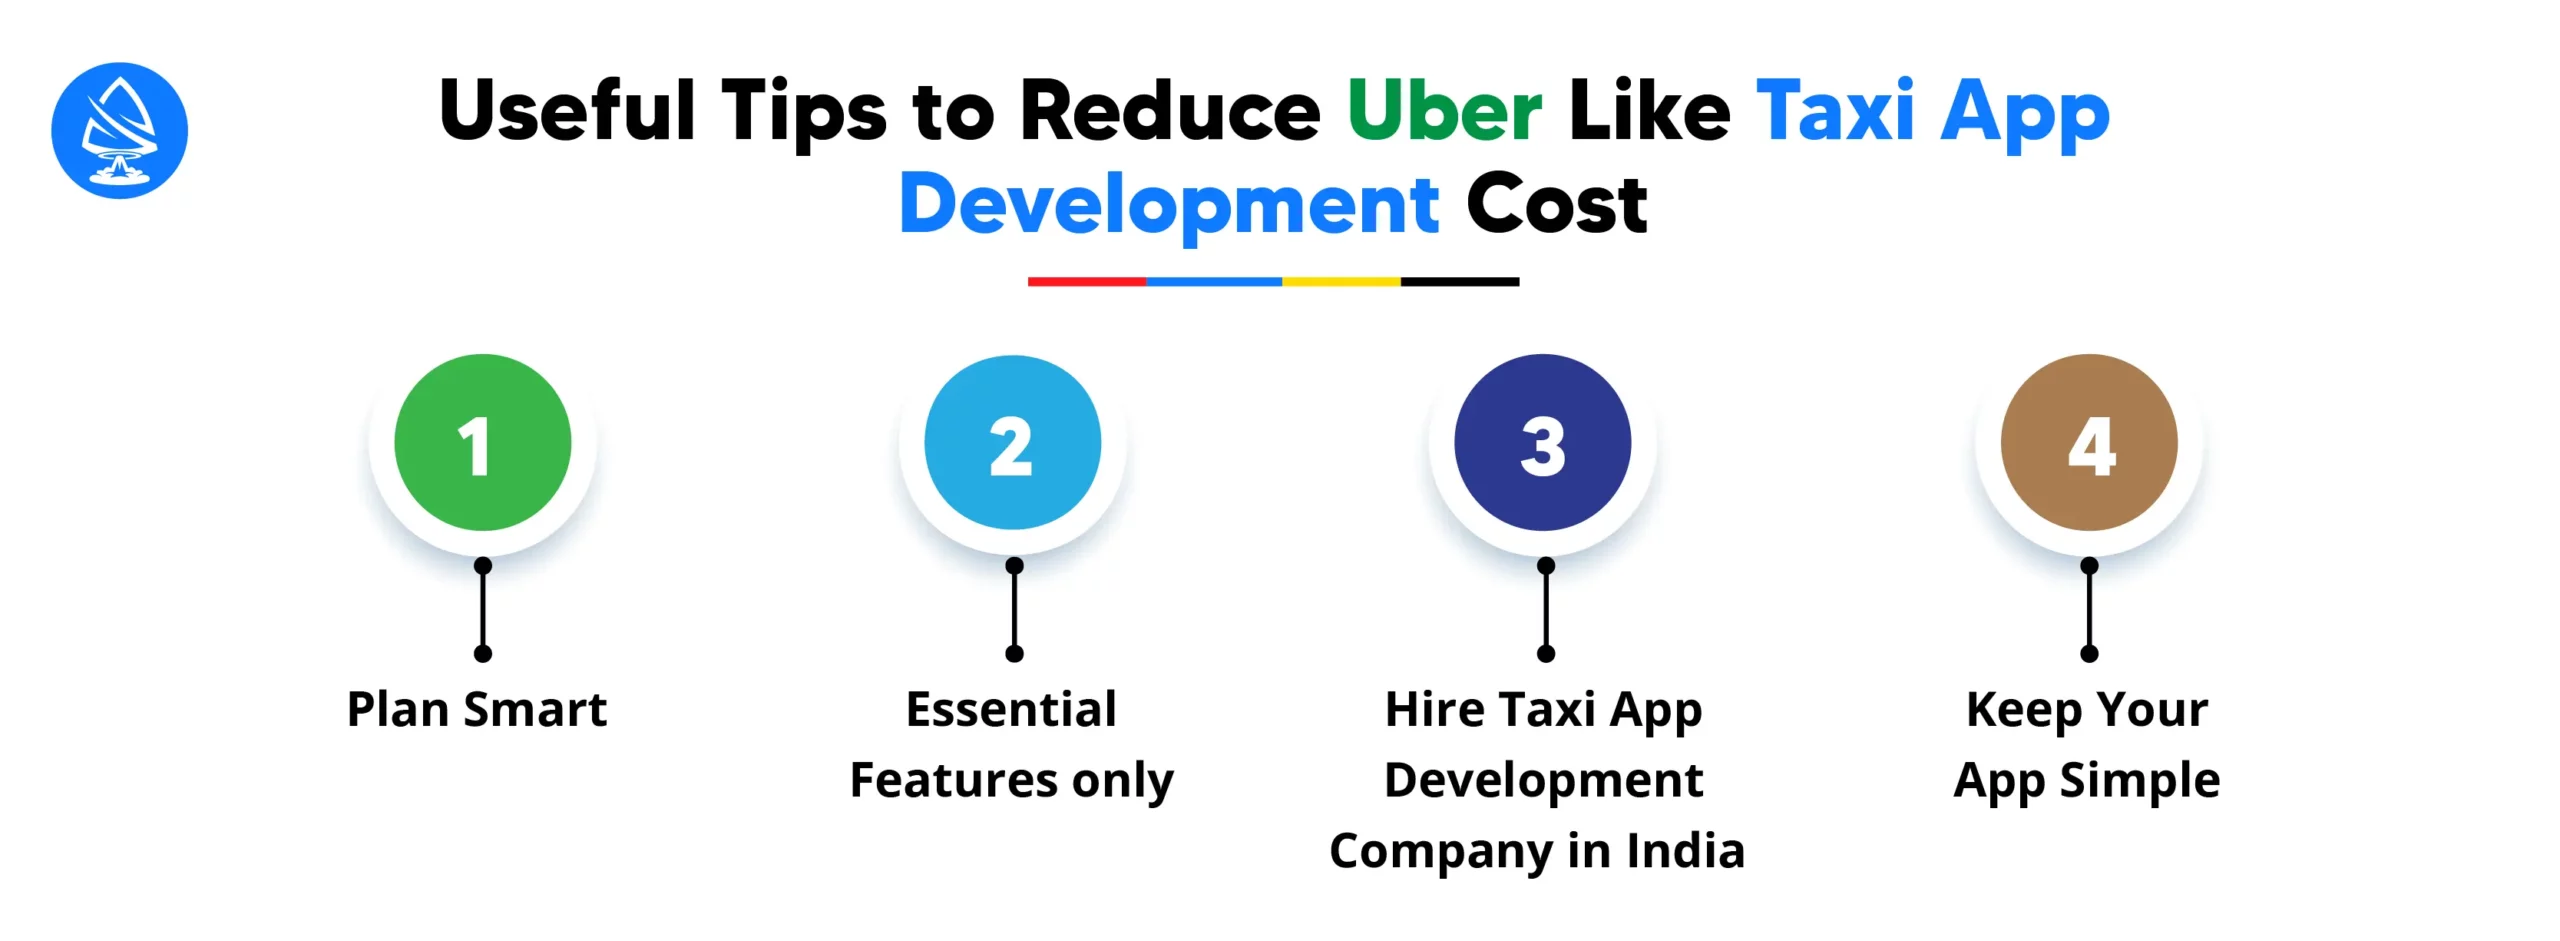 Useful Tips to Reduce Uber Like Taxi App Development Cost